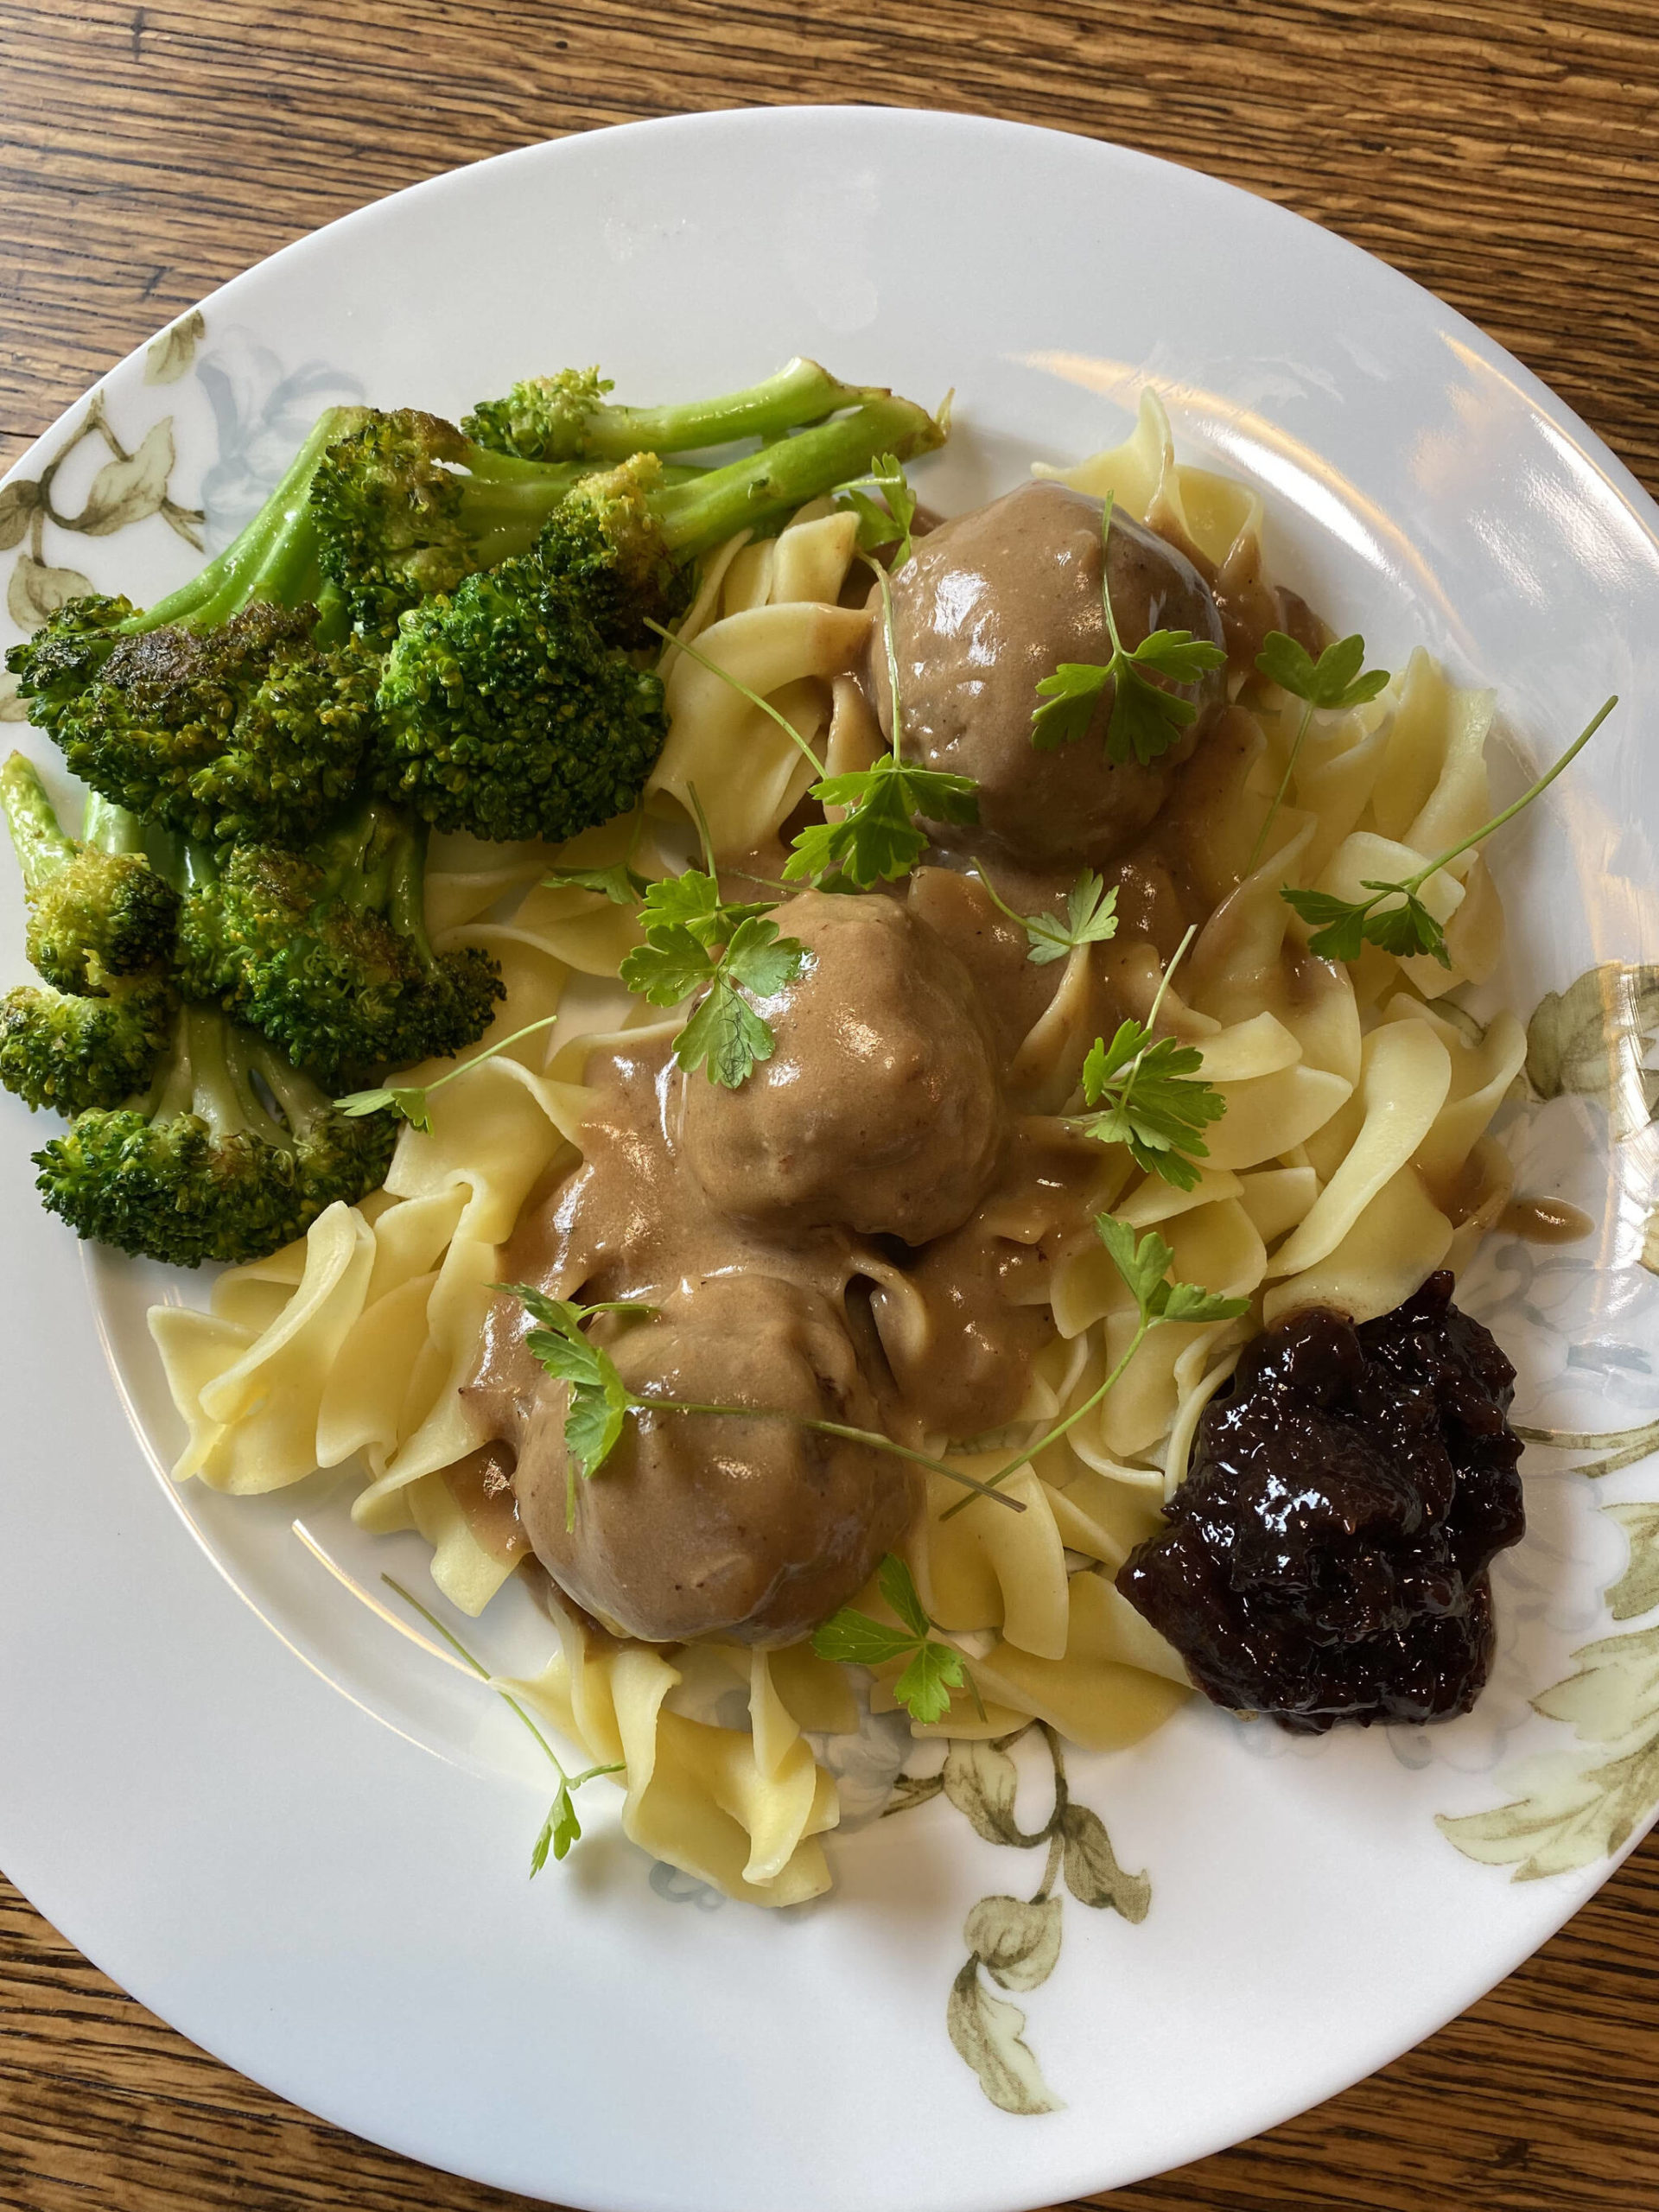 This version of Swedish meatballs features larger meatballs made of all beef instead of the traditional beef/pork combination. (Photo by Tressa Dale/Peninsula Clarion)